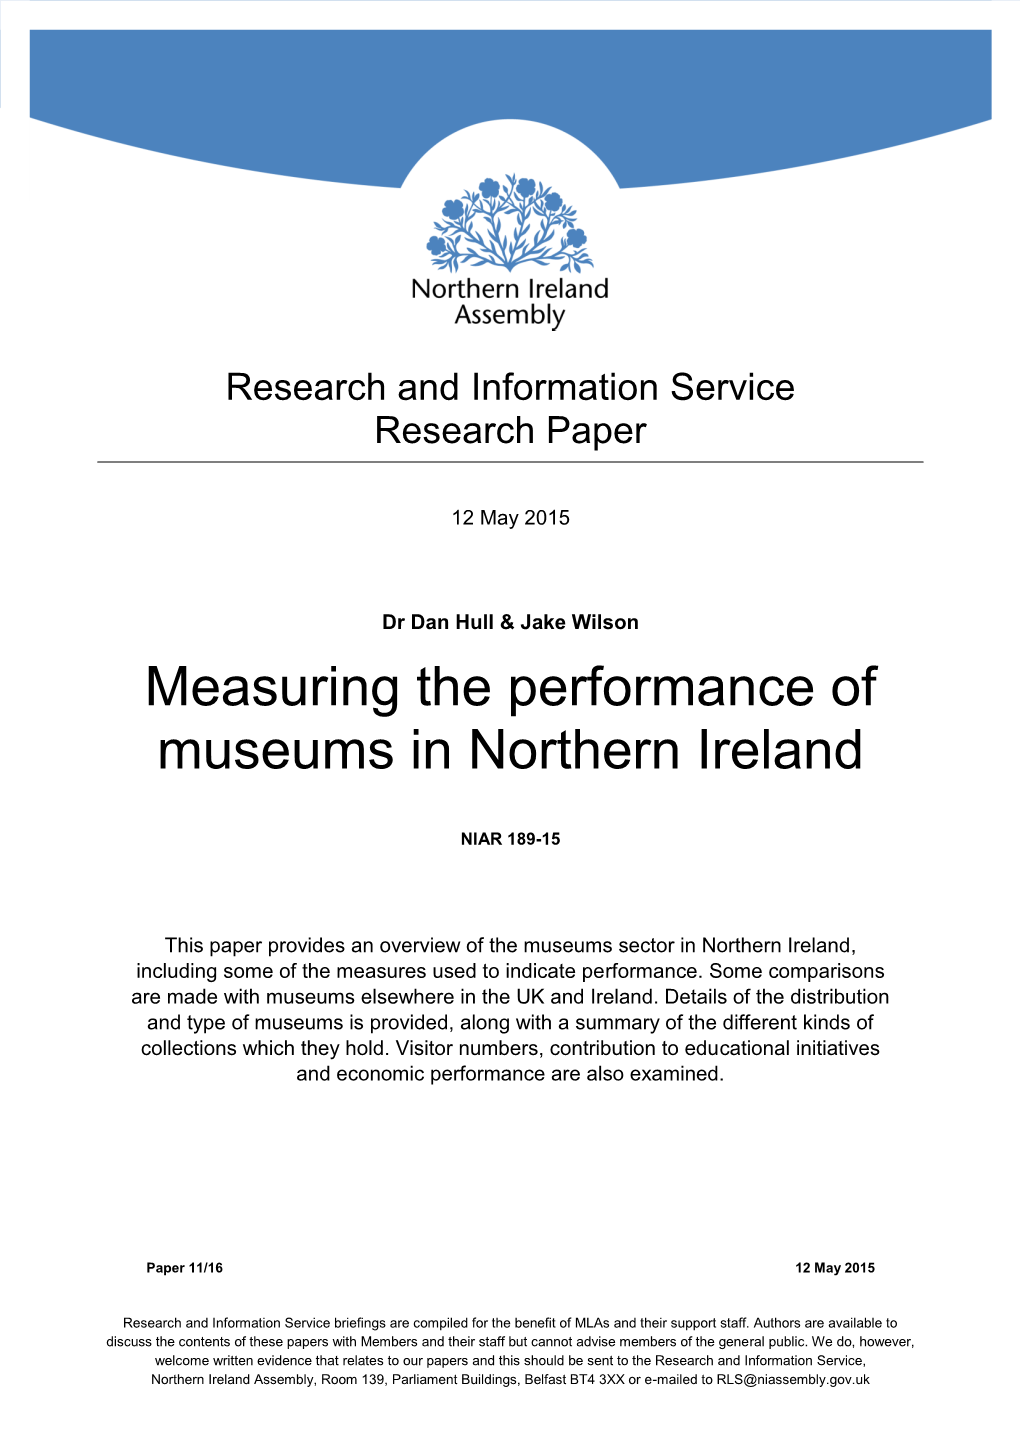 Measuring the Performance of Museums in Northern Ireland